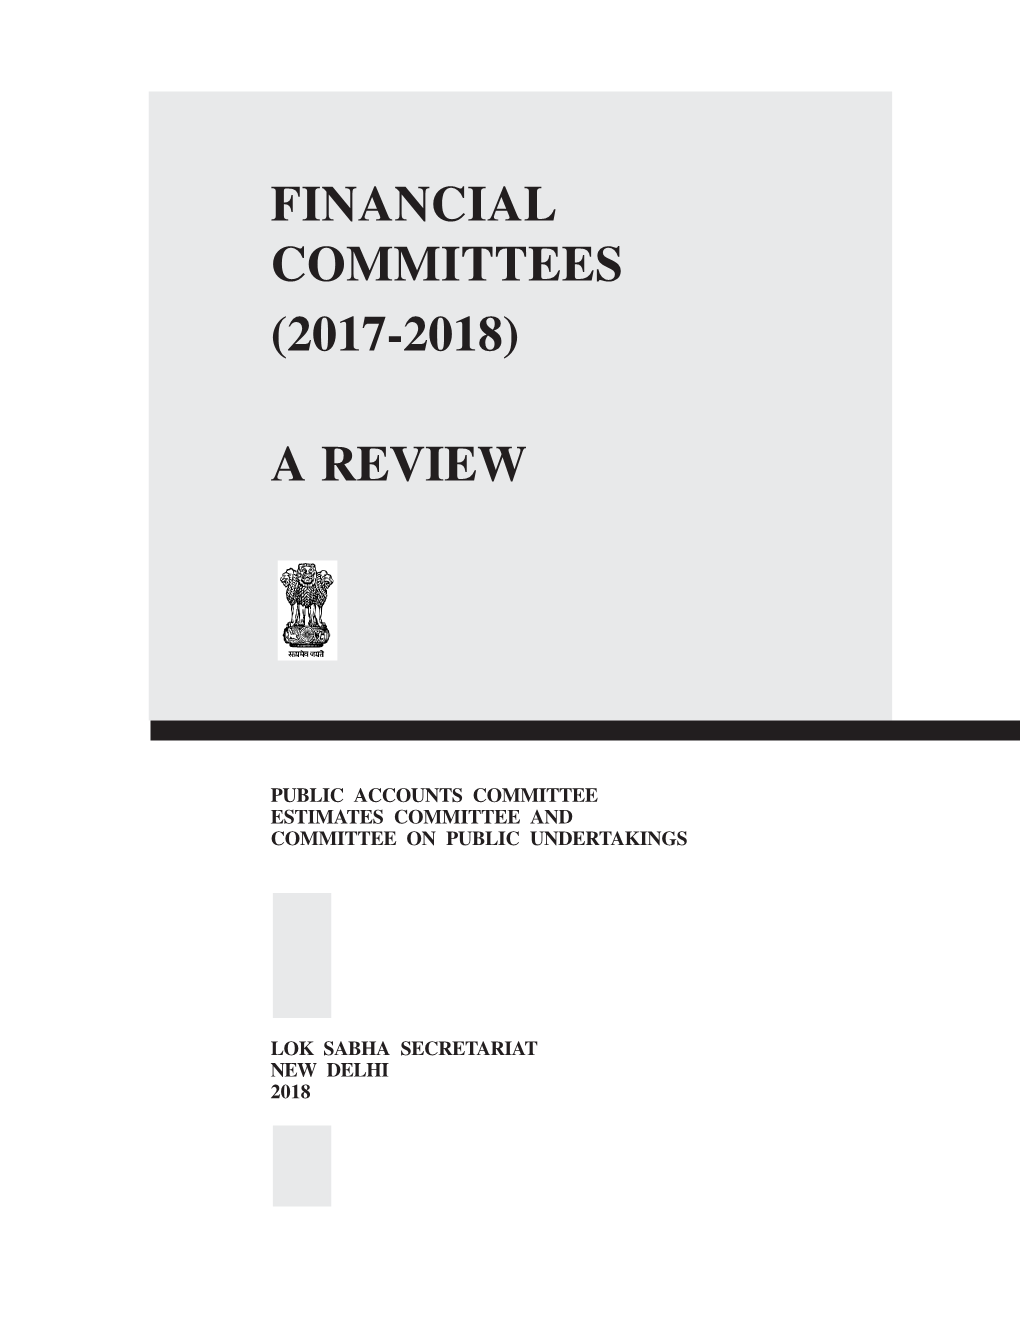 Financial Committees (2017-2018) a Review